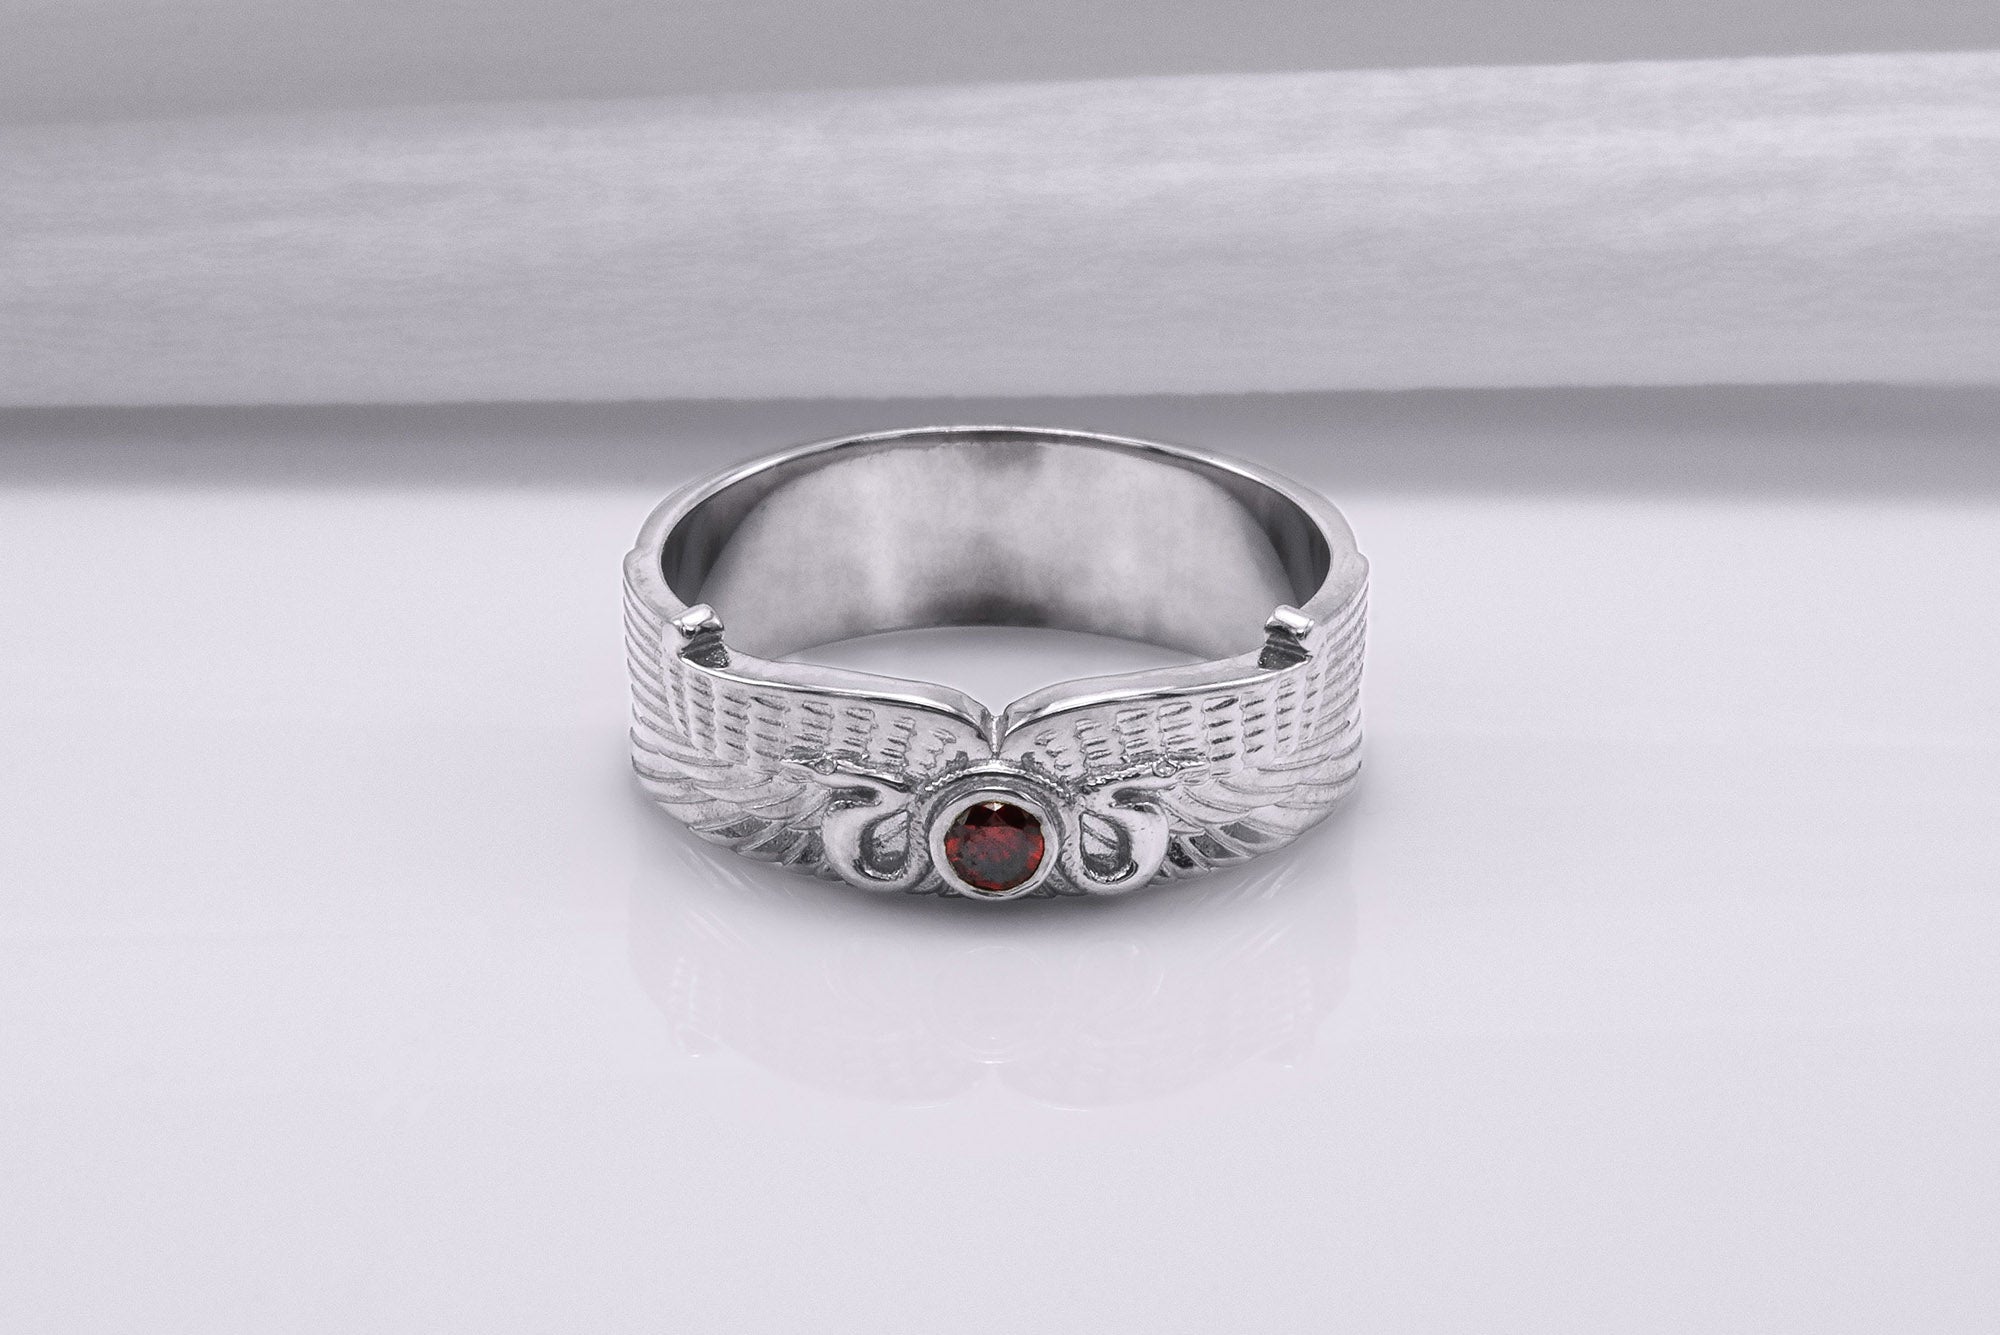 950 Platinum Egypt Ring with Snake Symbol and Cubic Zirconia, Unique Handmade Jewelry